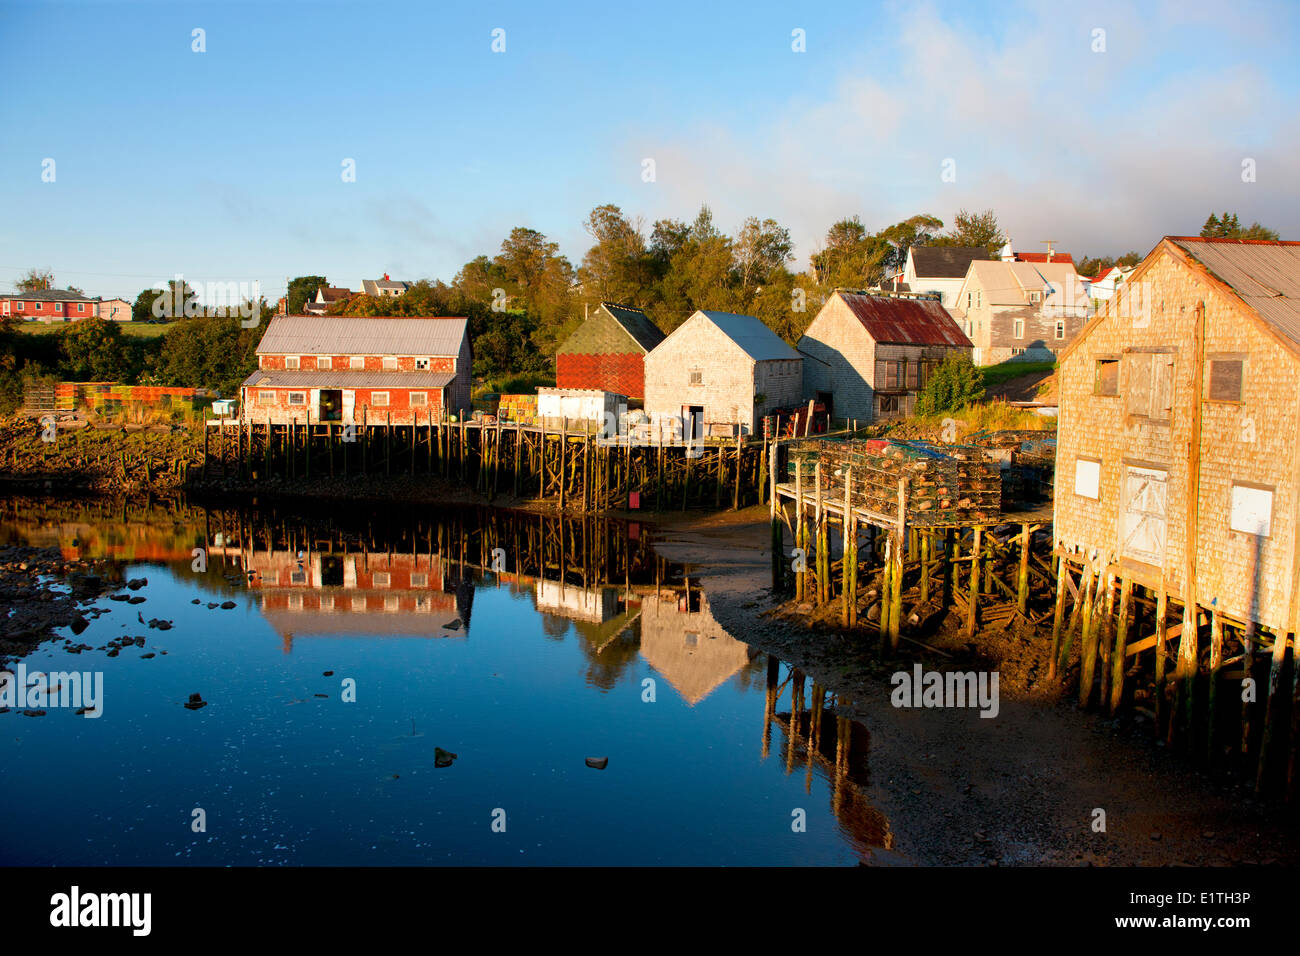 Fishing shed reflected in harbour at low tide, Seal Cove, Grand Manan Island, Bay of Fundy, New Brunswick, Canada Stock Photo